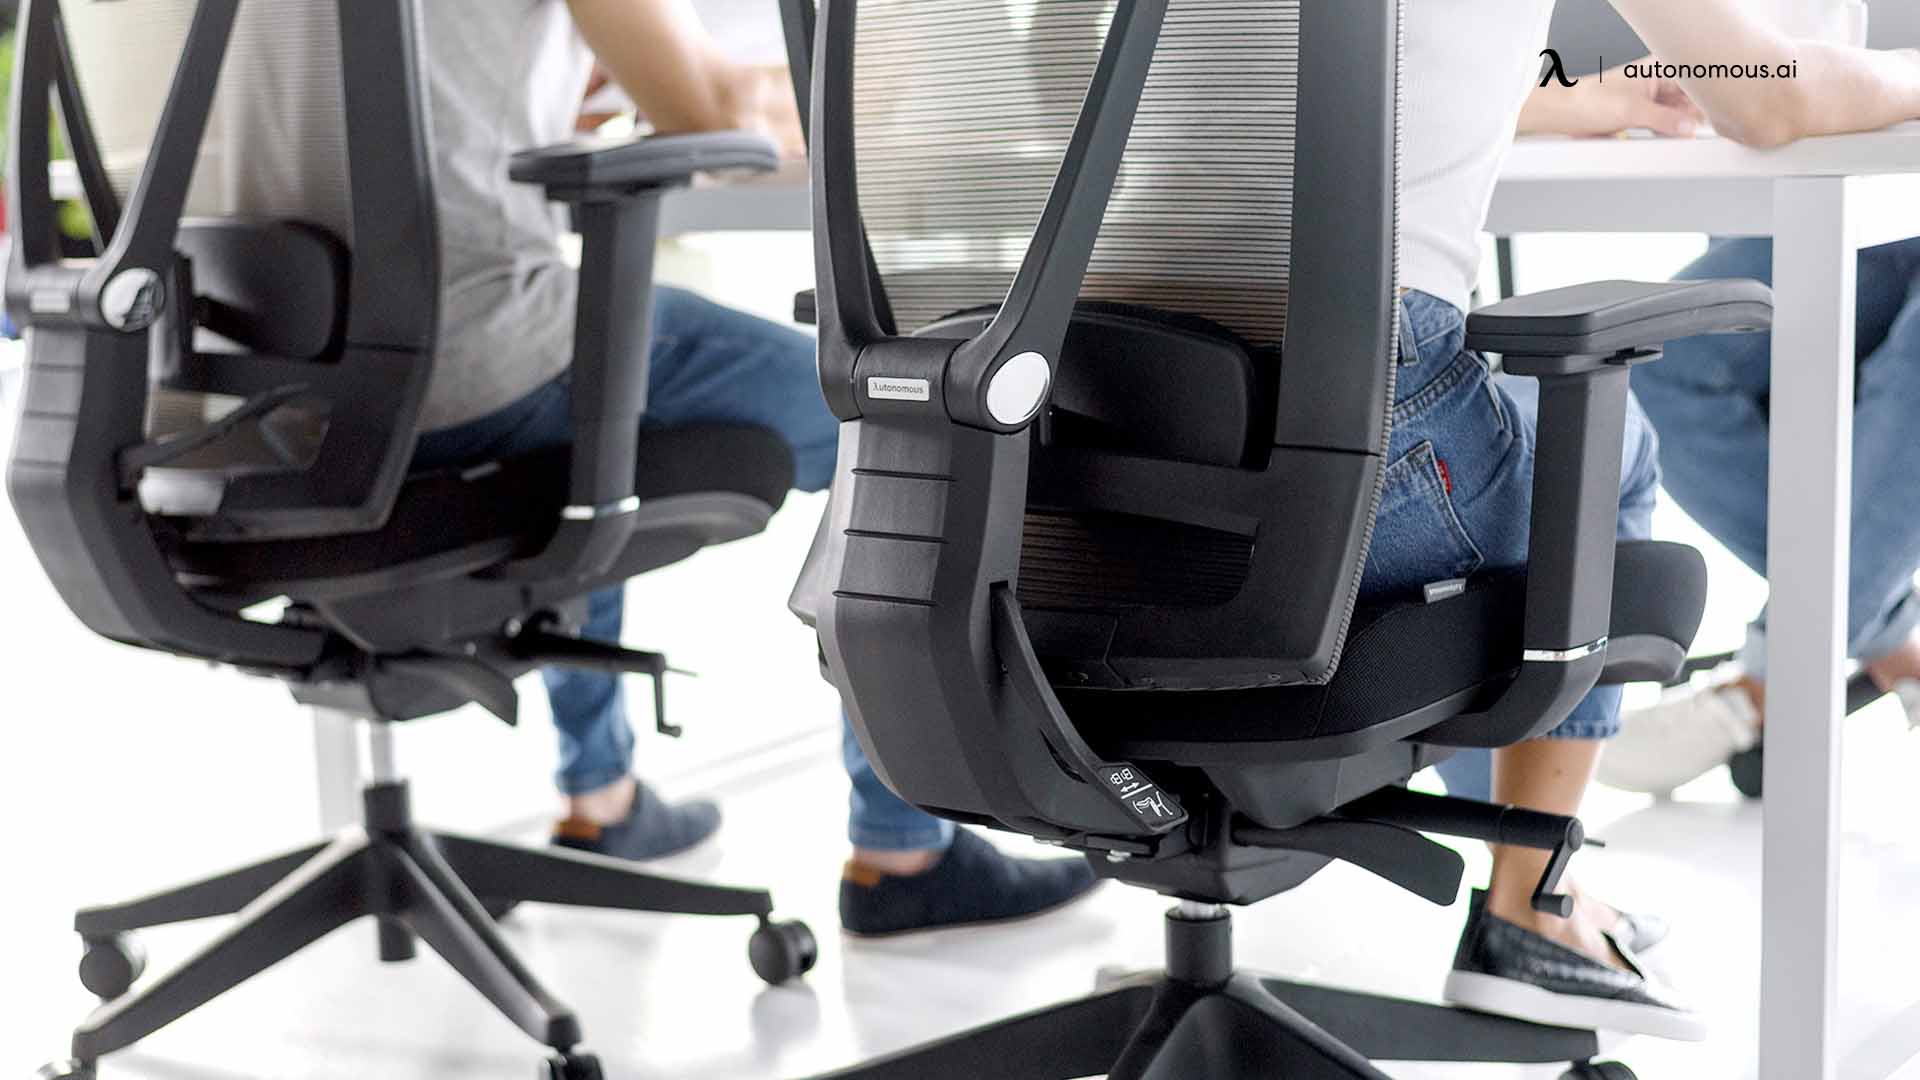 15 Best Adjustable Height Office Chairs of 2022 Review